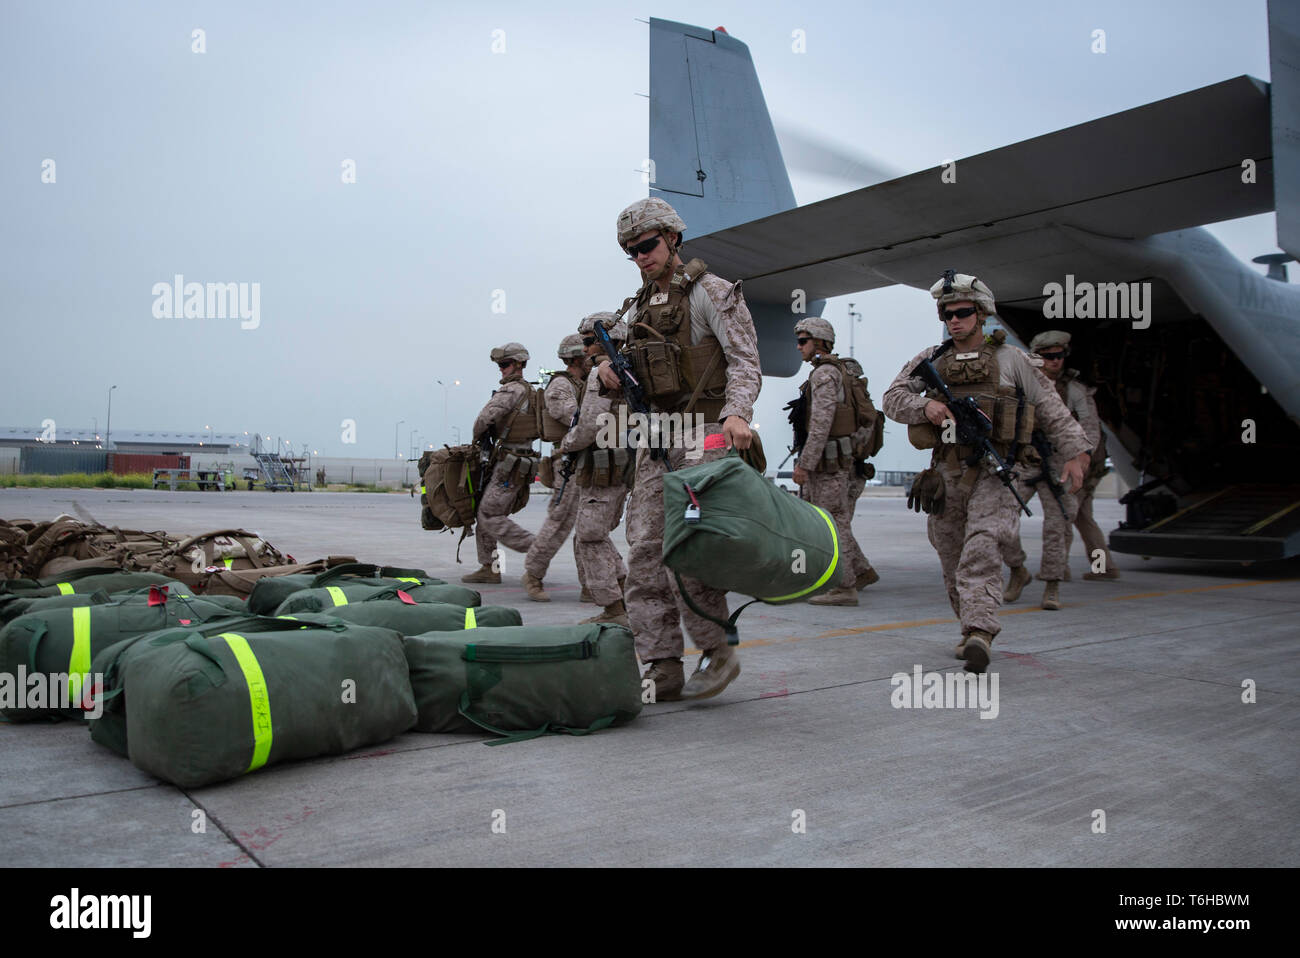 U.S. Marines with Counter-Unmanned Aerial Systems Detachment, 2nd Low Altitude Air Defense Battalion, attached to Special Purpose Marine Air Ground Task Force Crisis Response-Central Command, unload gear after arriving in Southwest Asia, April 15, 2019. 2nd LAAD Battalion provides close in, low altitude, surface-to-air weapons fires in defense of forward combat areas and installations in the Central Command area of operations. (U.S. Marine Corps photo by Cpl. Alina Thackray) Stock Photo